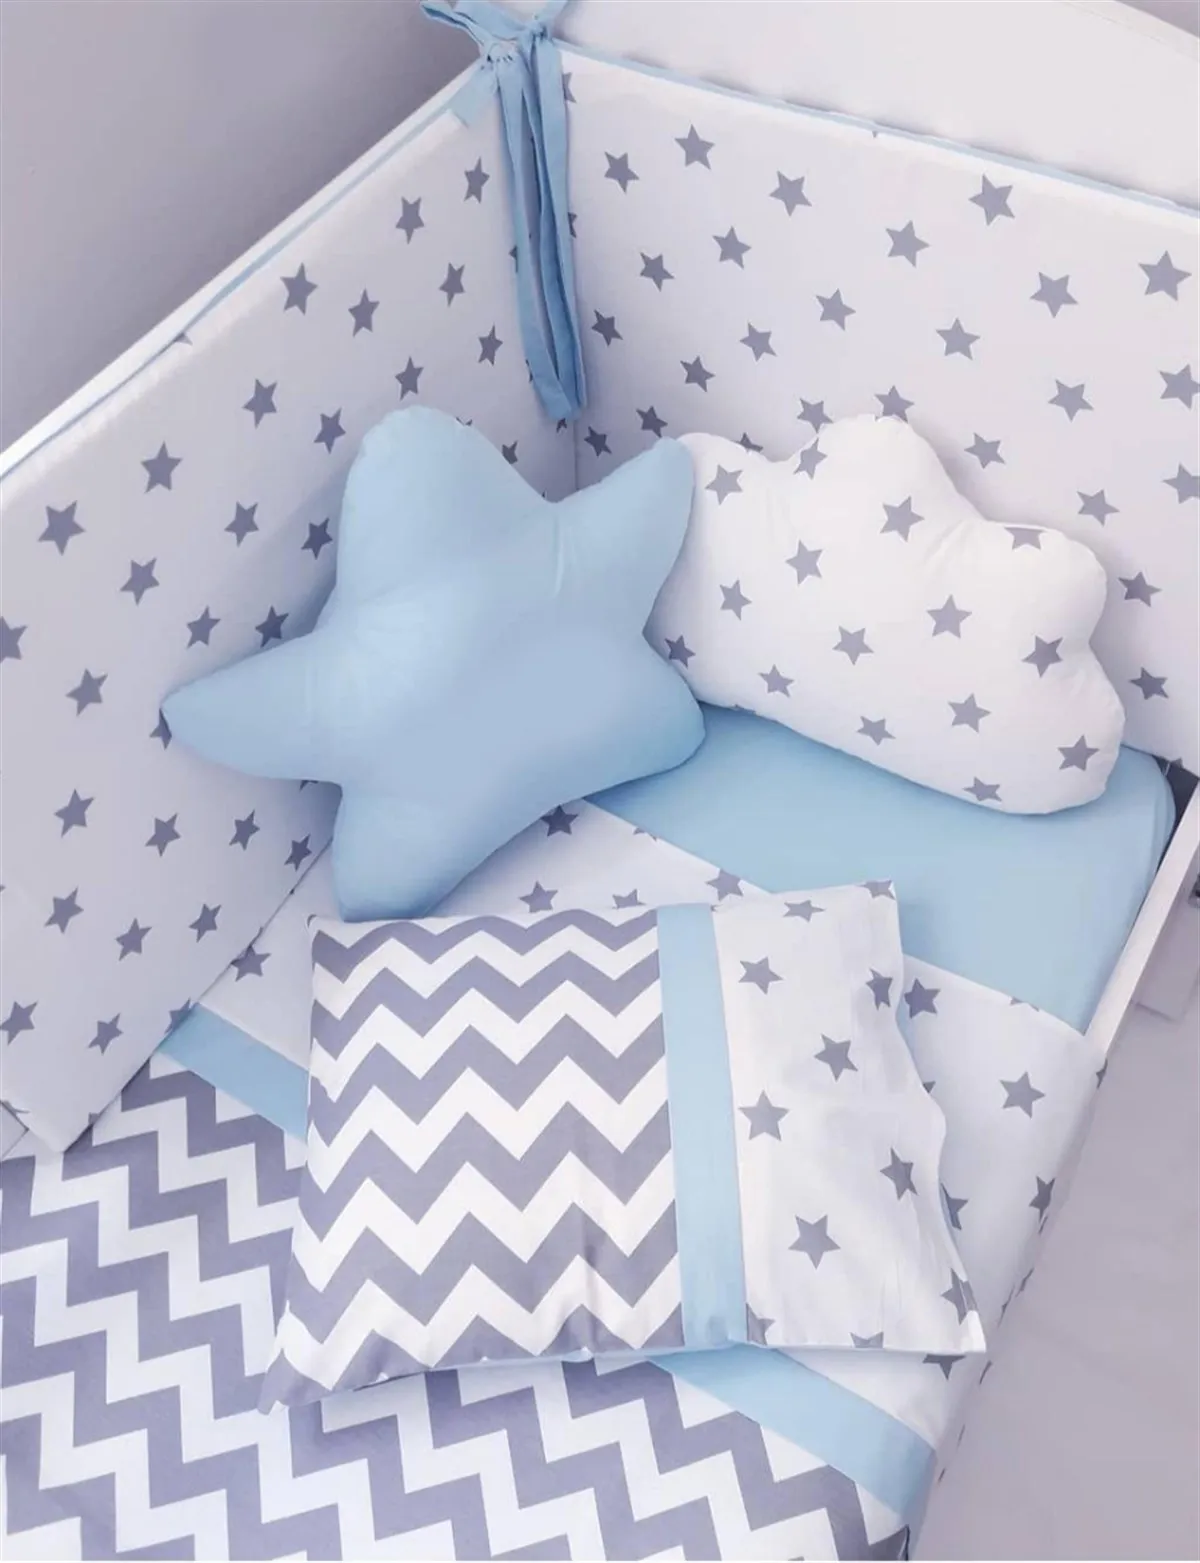 Jaju Baby Handmade, Gray Star Blue Combination Baby Duvet Cover Set and Edge Protection, Baby Duvet Cover, Baby Bed Sheet